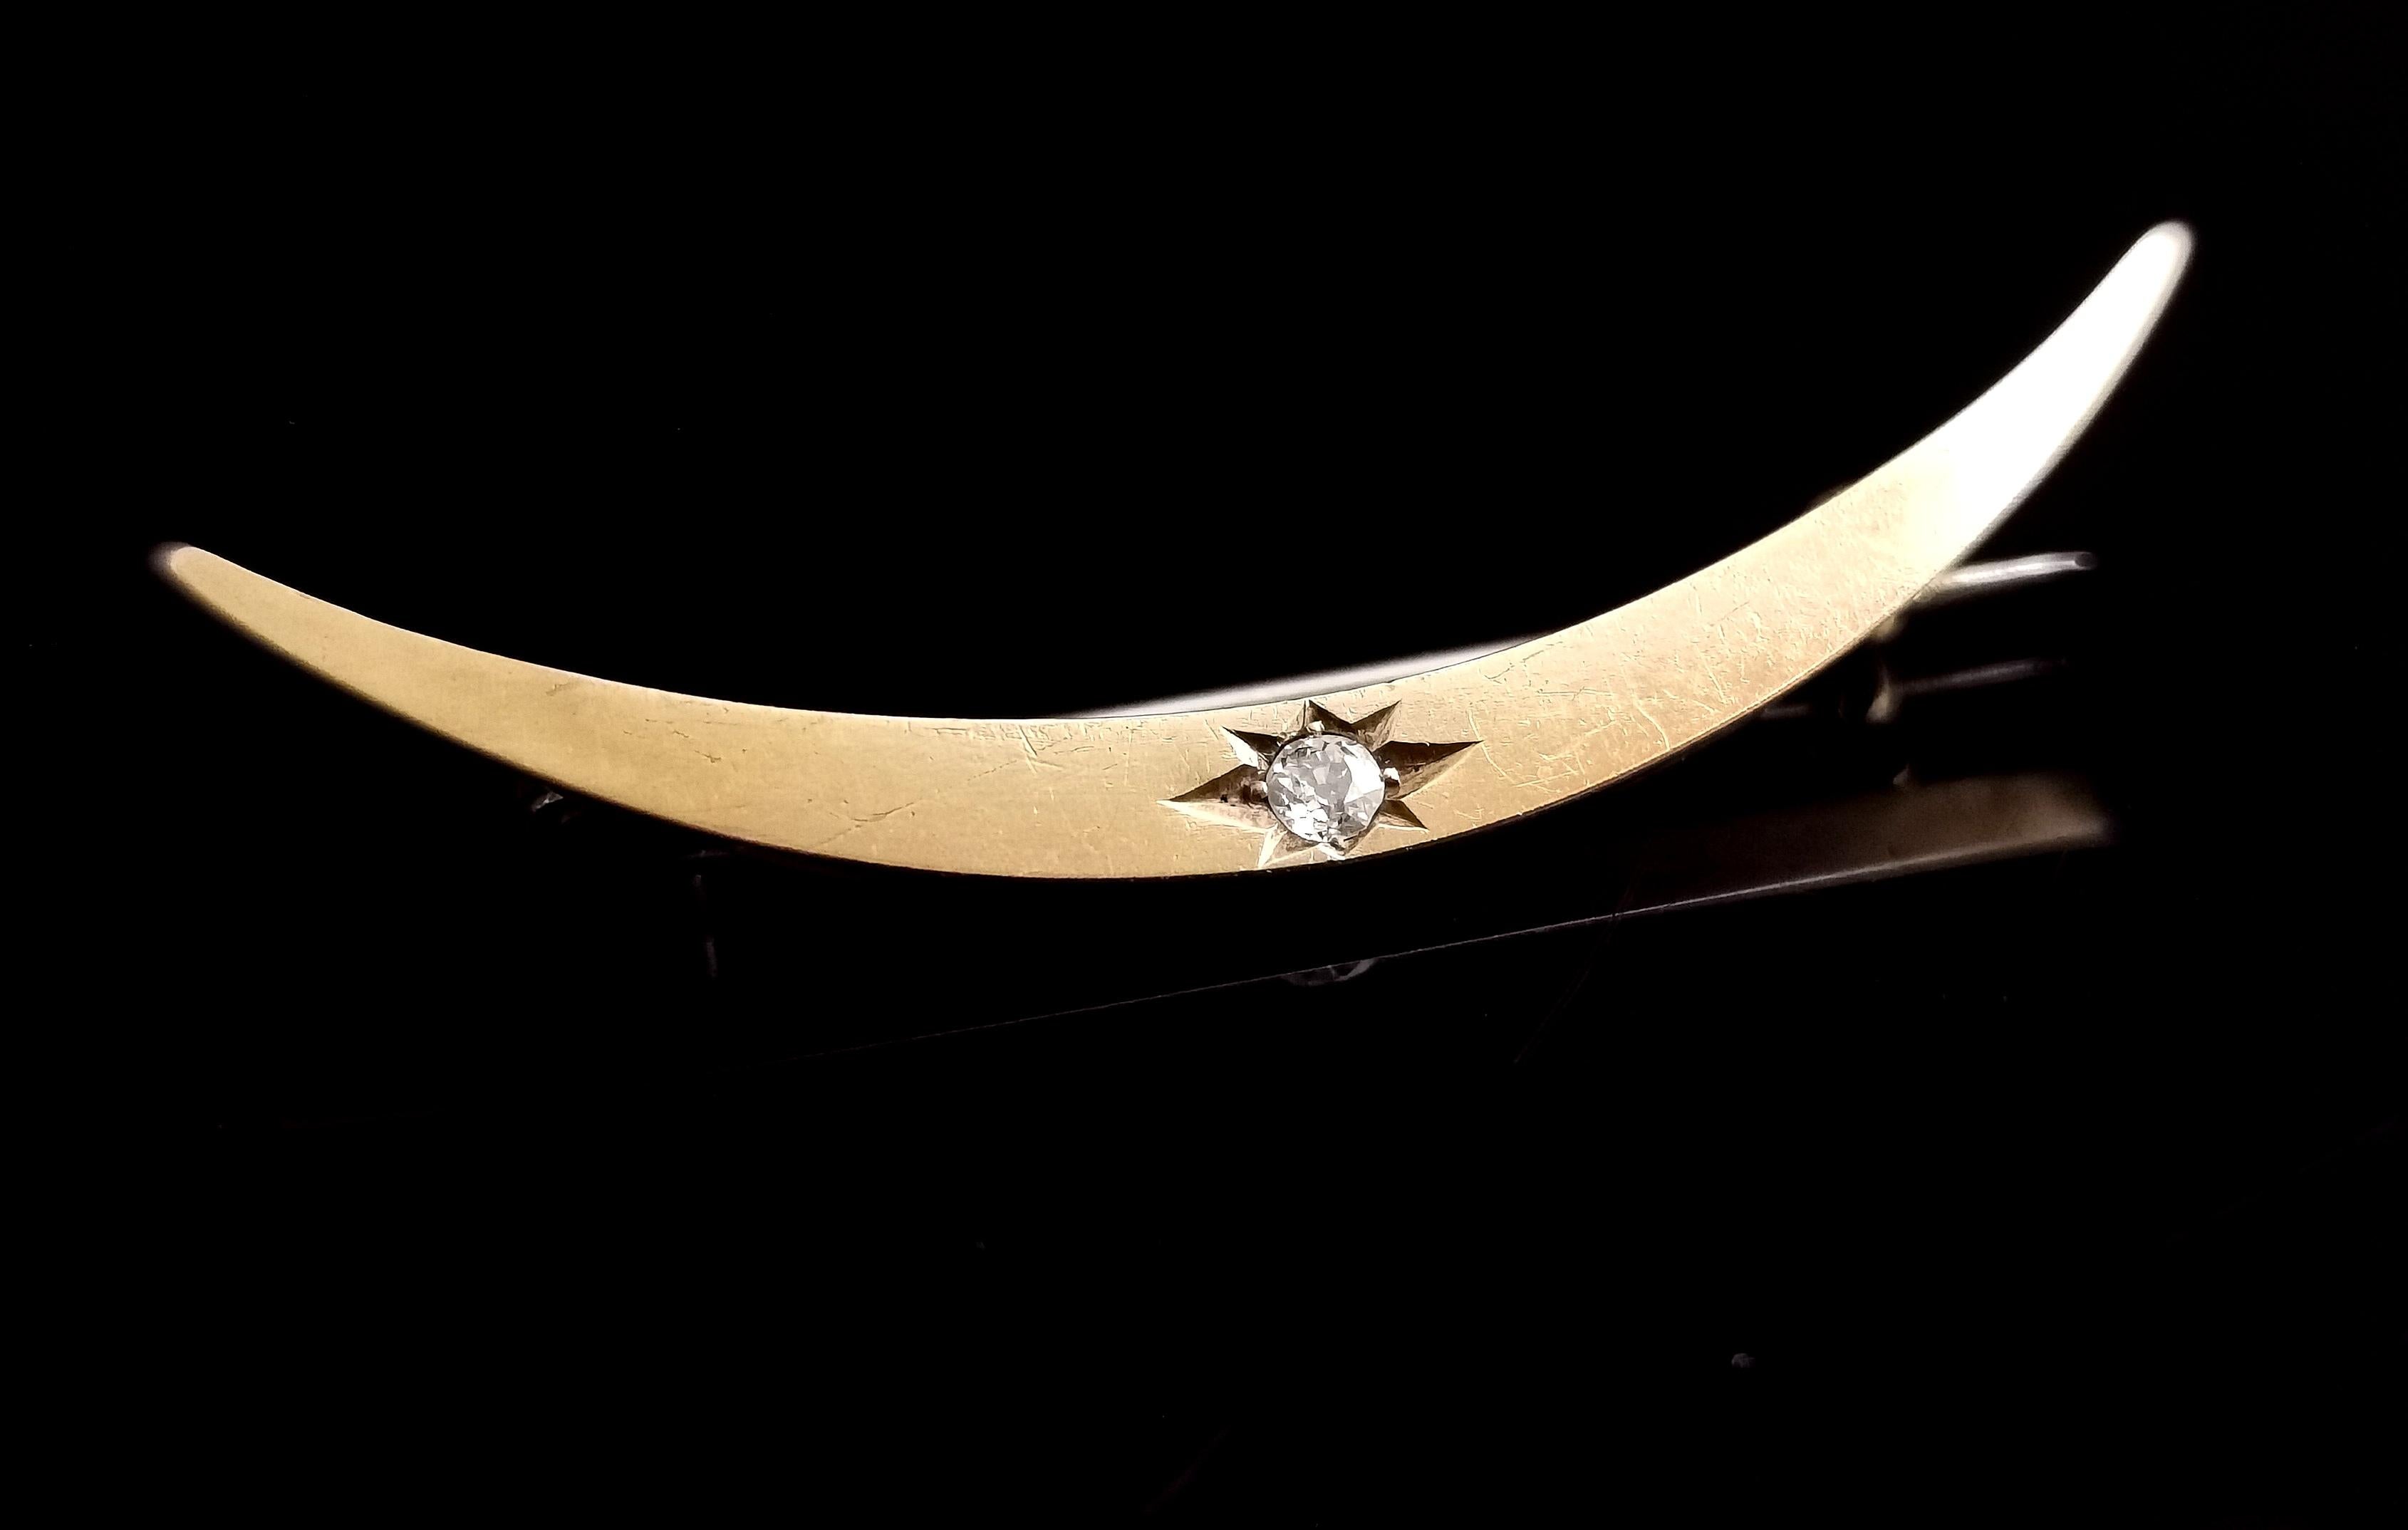 A very pretty late Victorian, 15kt gold diamond crescent brooch.

A beautiful curved rich gold moon star or gypsy set with a single sparkling old cut diamond.

Crescent moons were a popular motif in Victorian and later Edwardian jewellery, they are